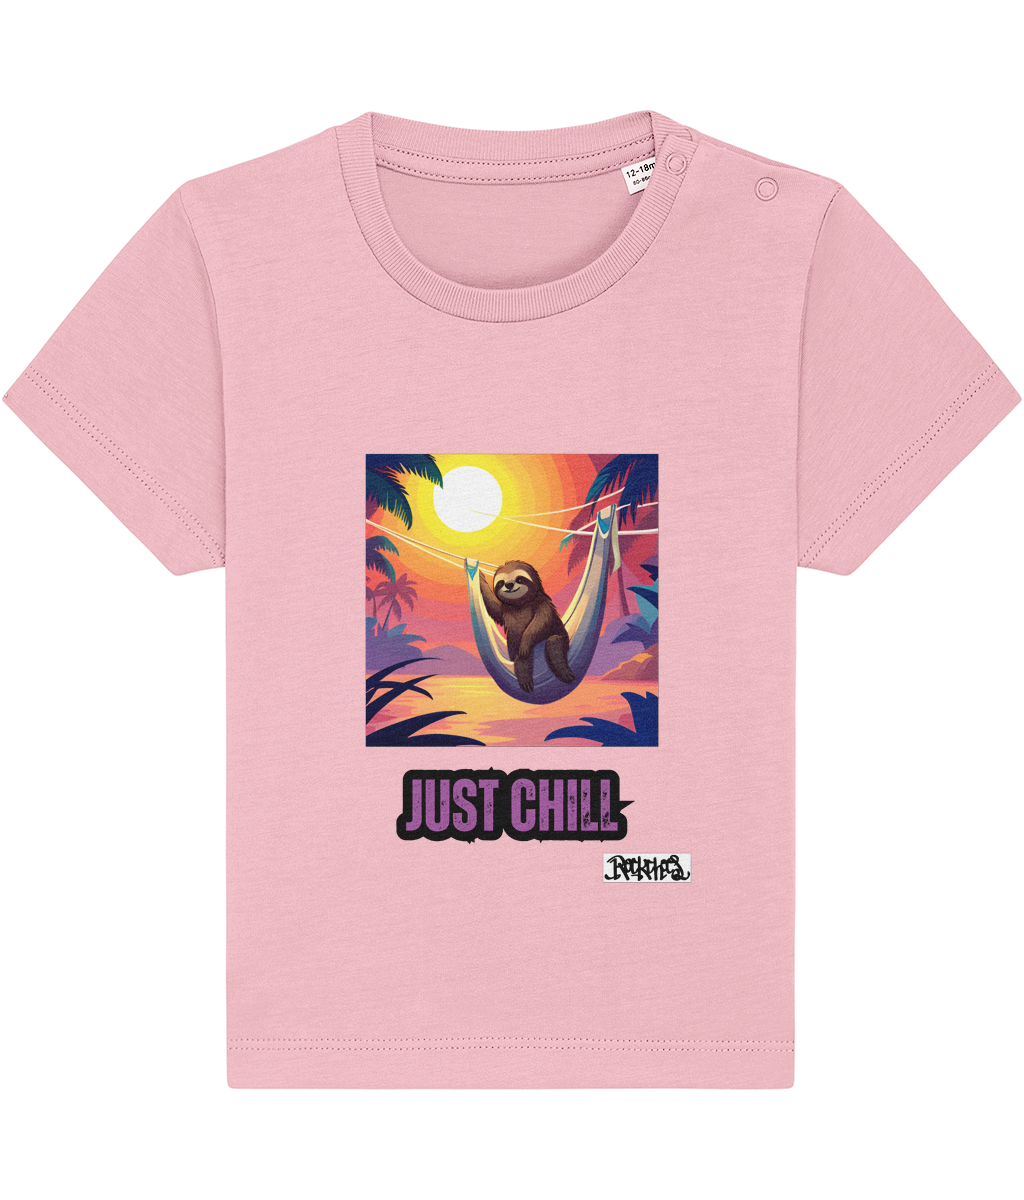 Just Chill Sloth T Shirt Designed by Rock Chocs